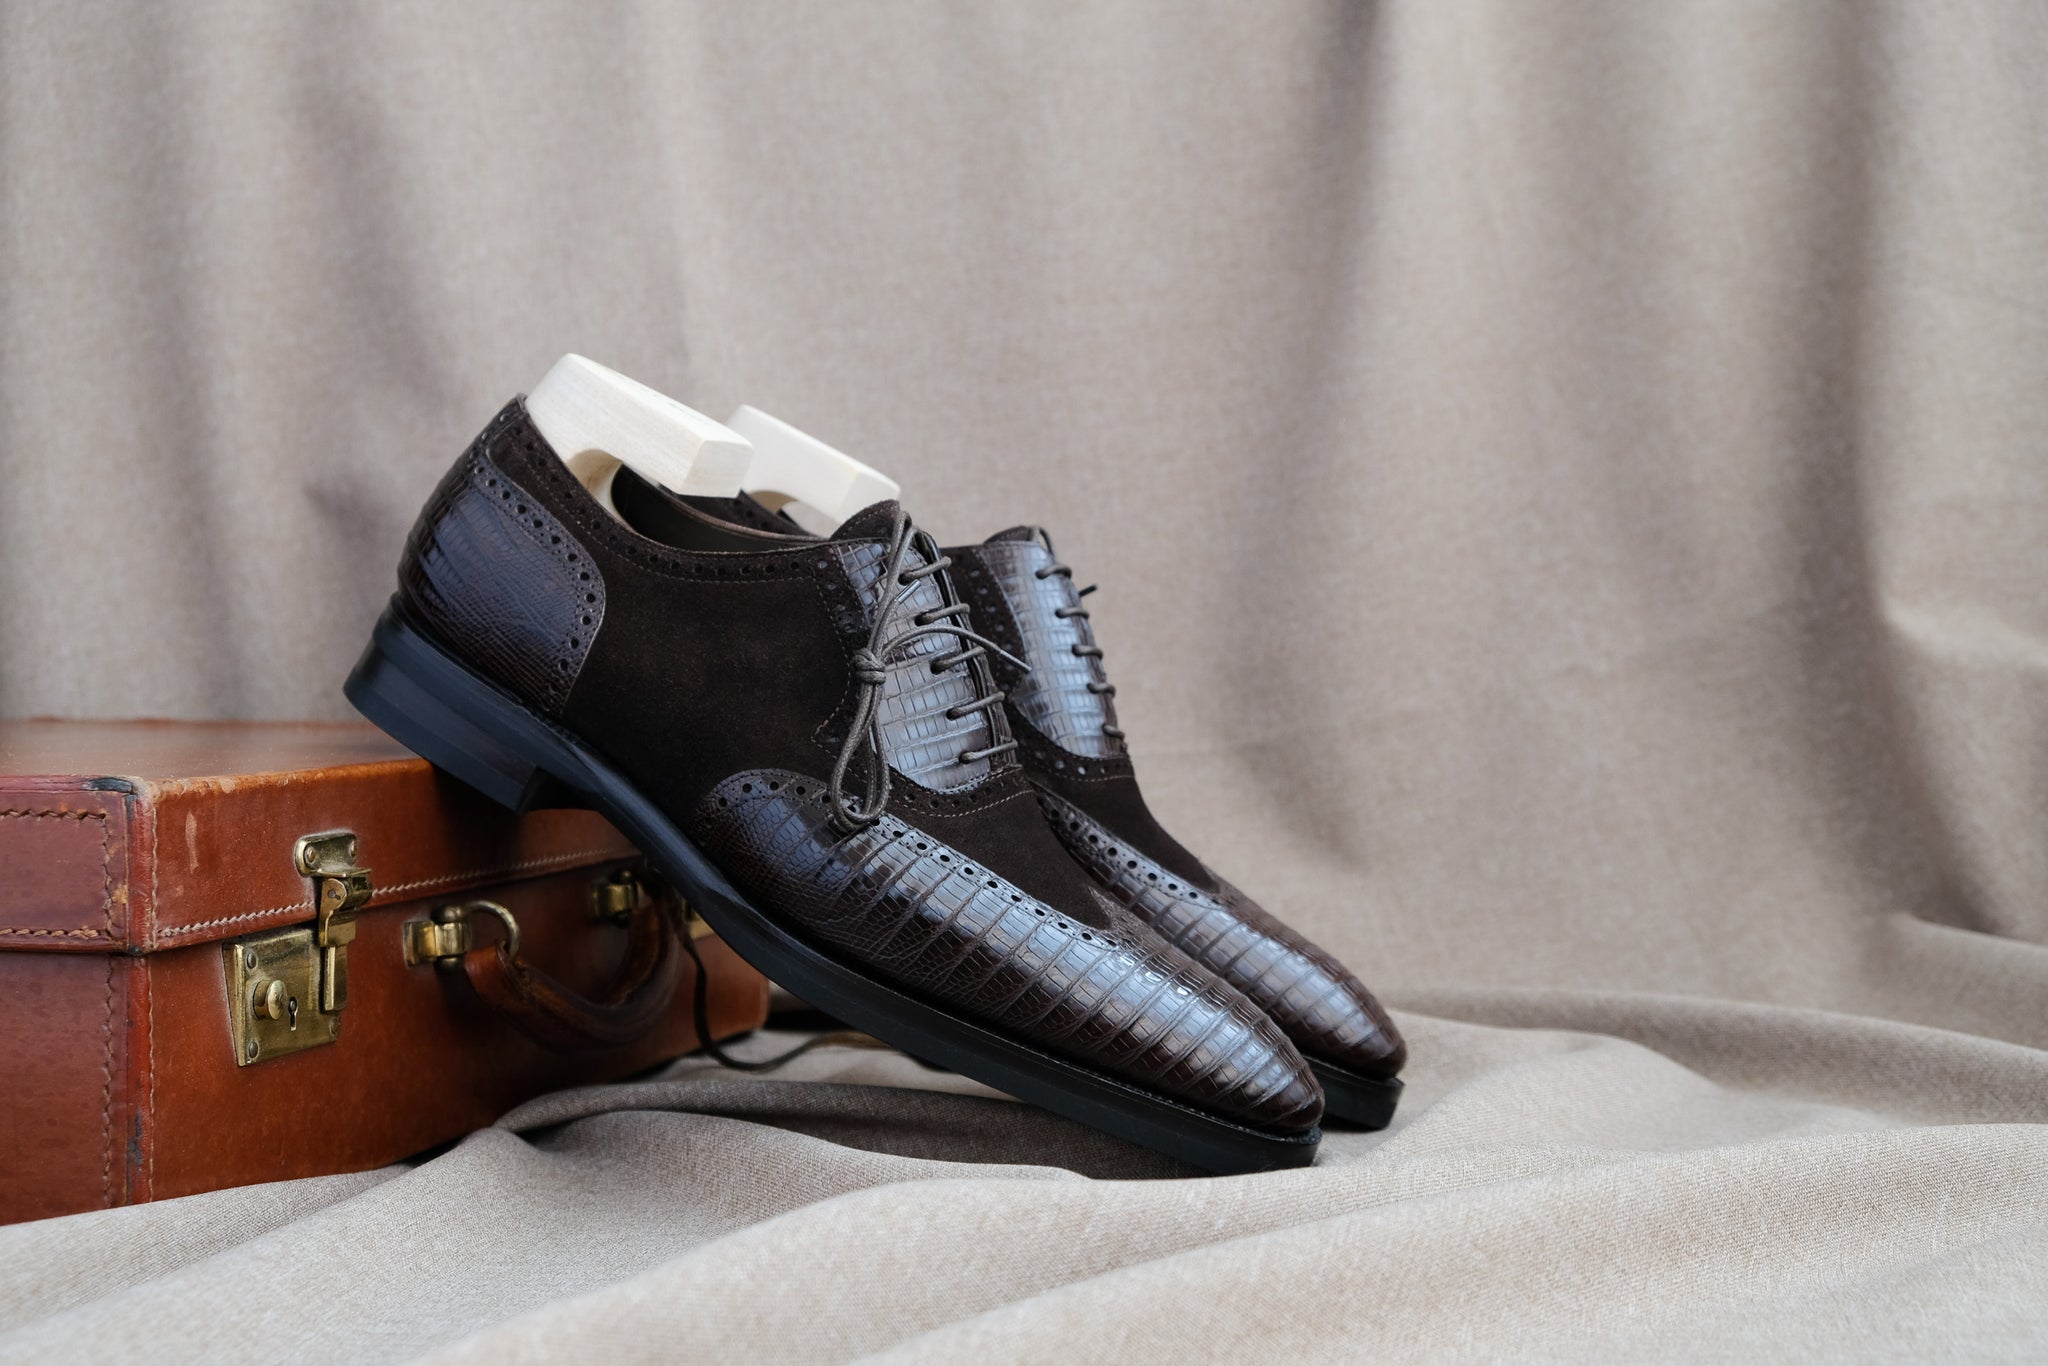 Zonkey Boot hand welted wingtip oxfords from lizard leather and suede